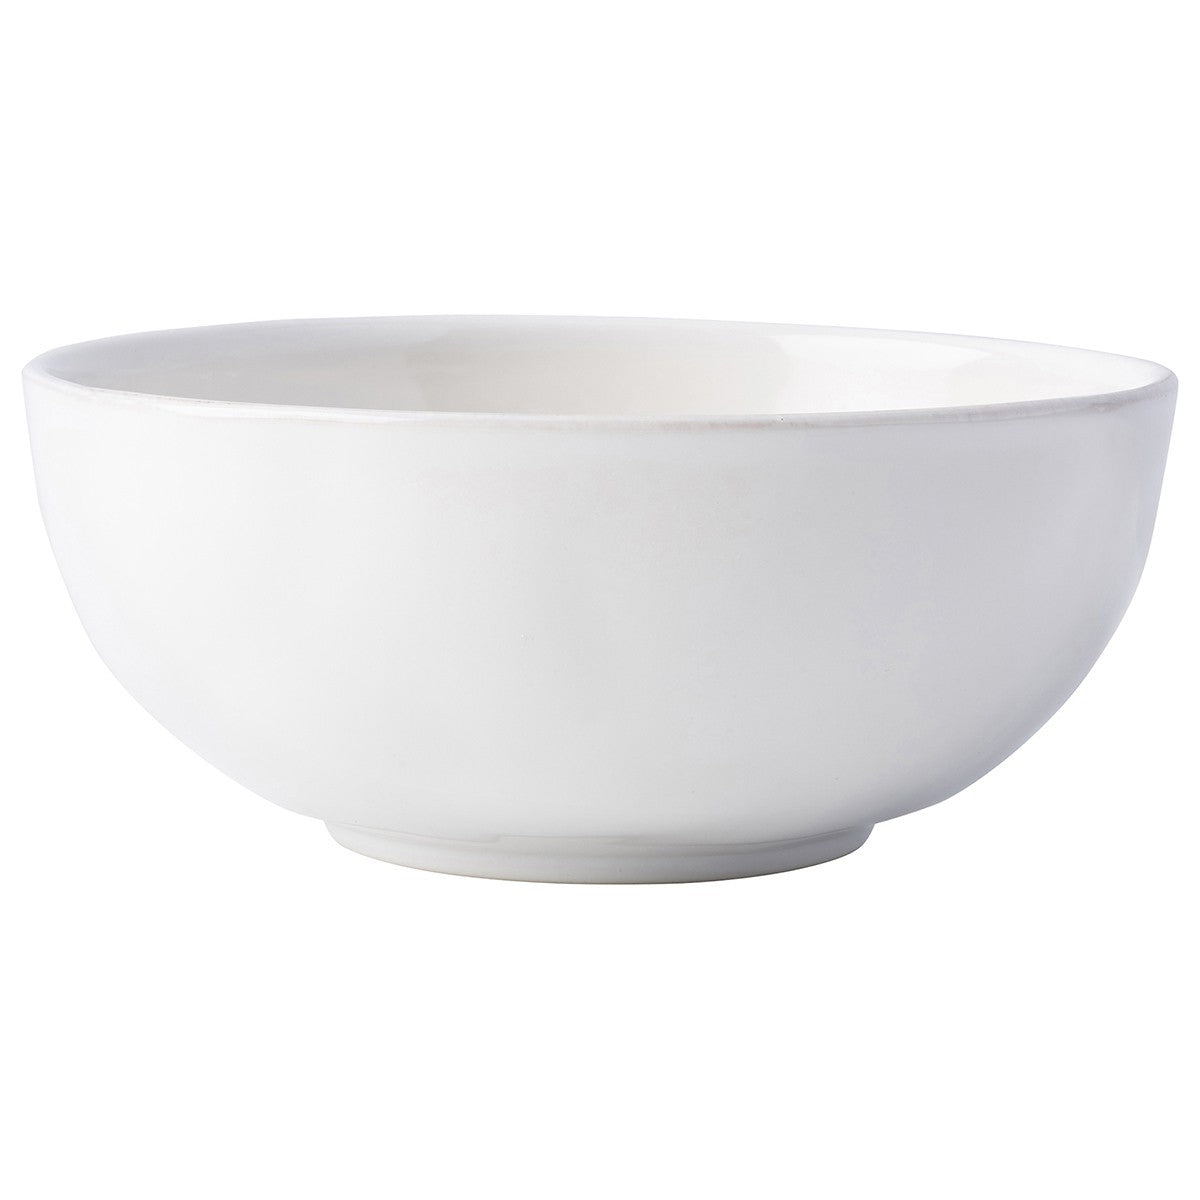 puro cereal bowl on a white background